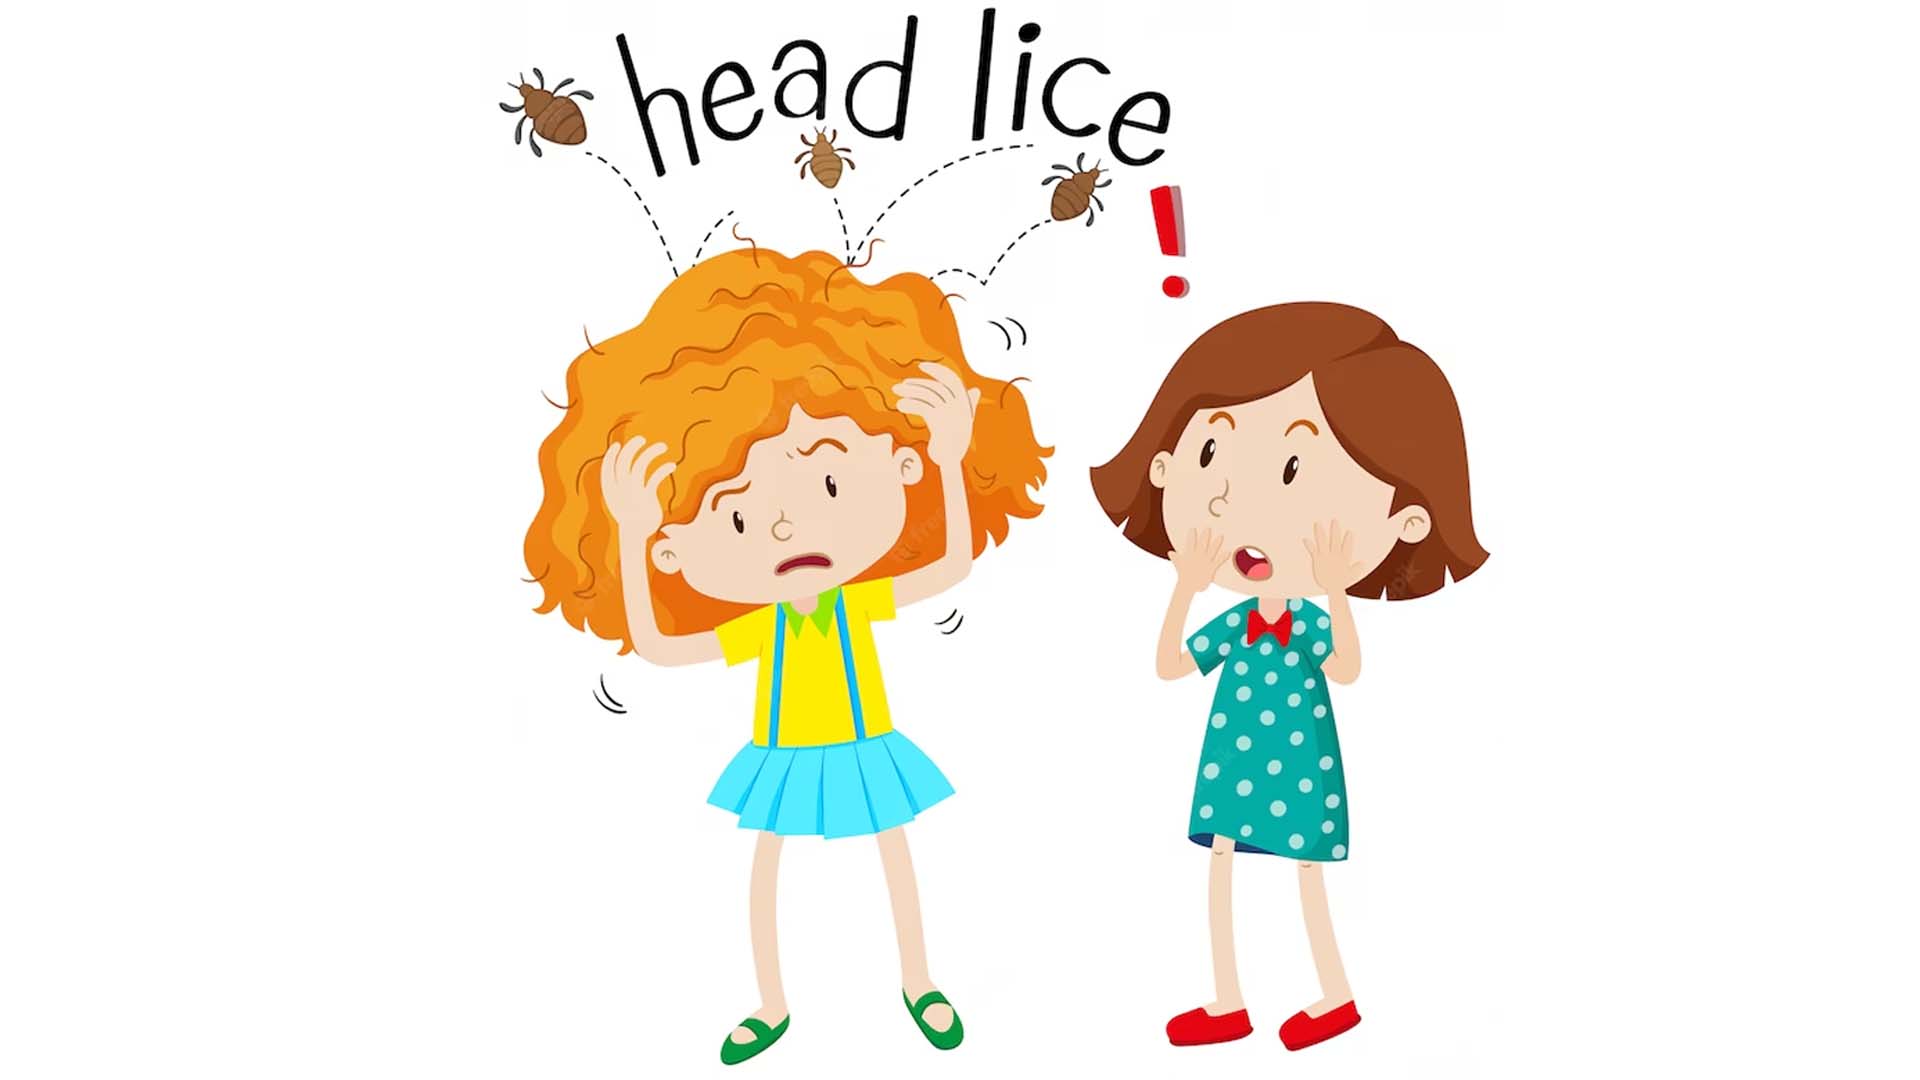 Does Lice Cause Hair Loss?